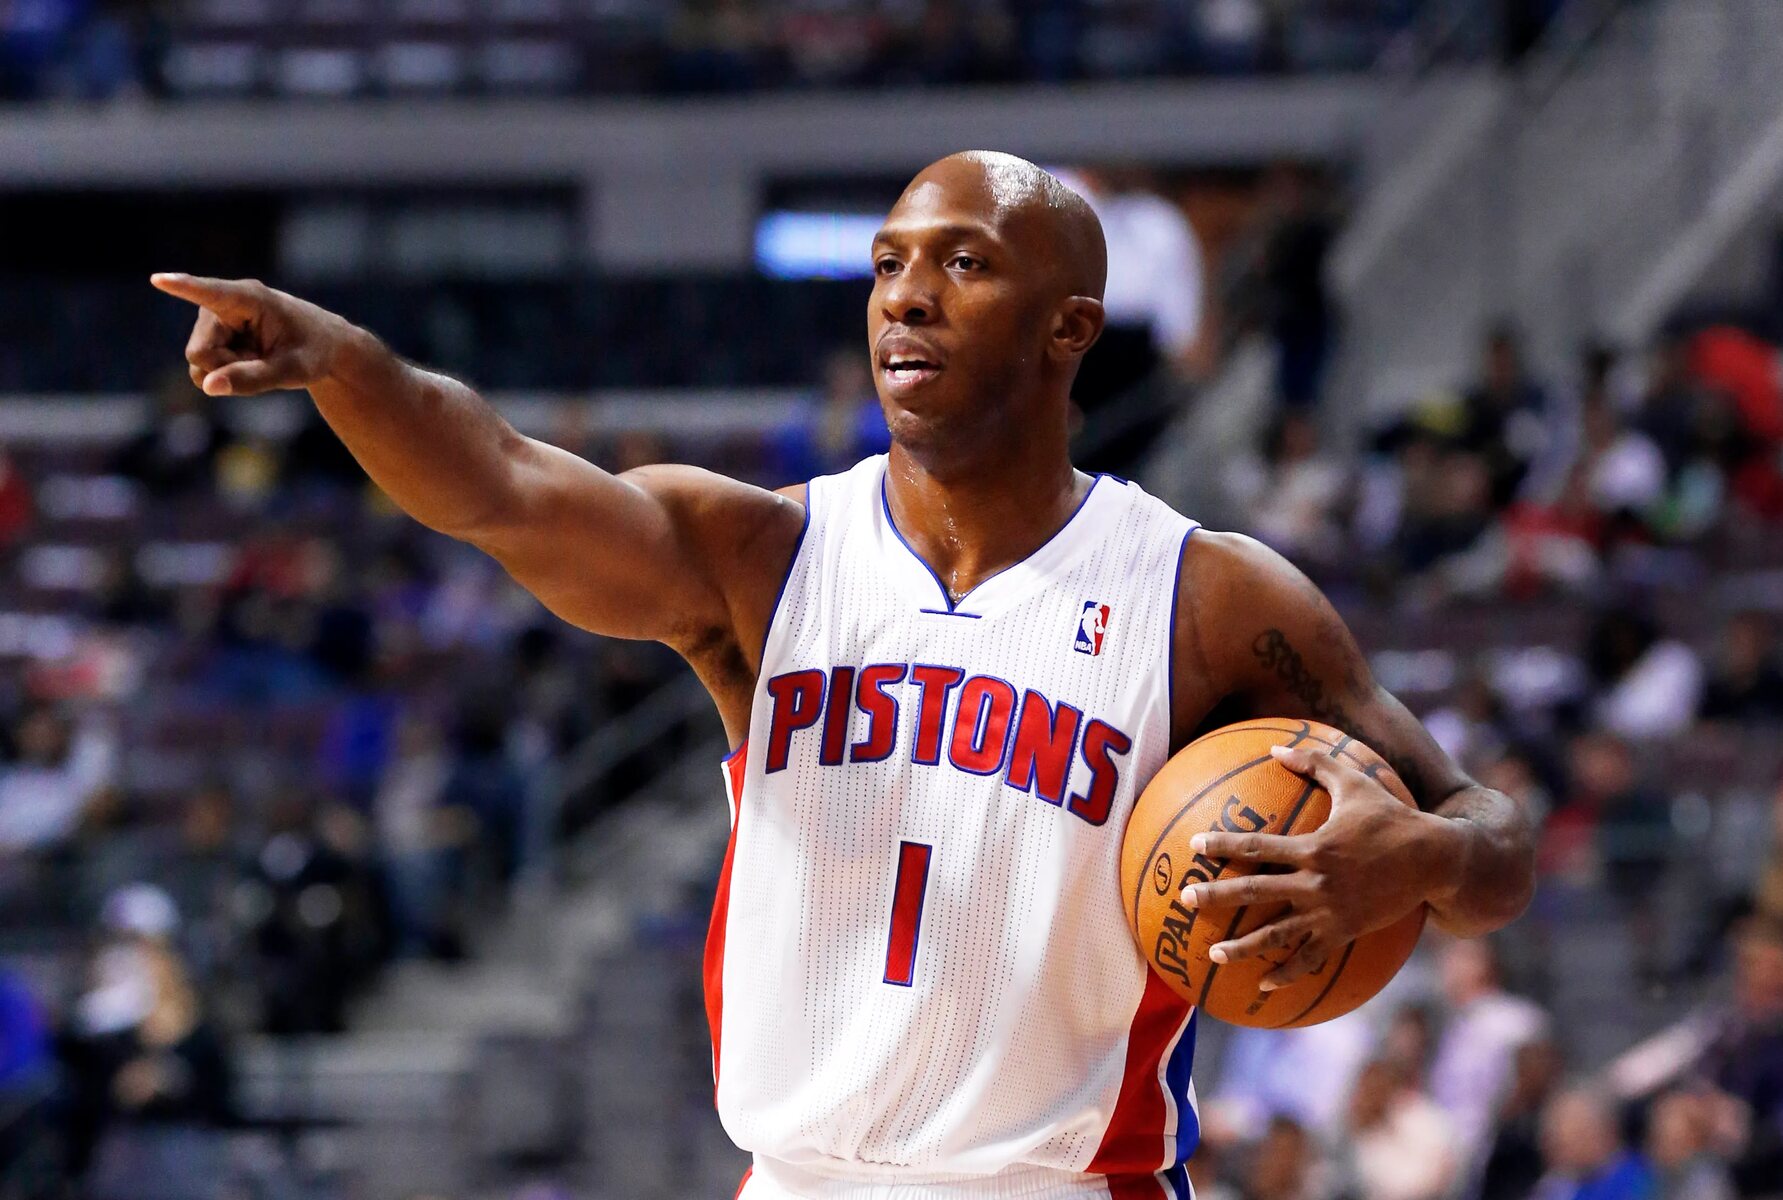 Chauncey Billups focuses on style over star power in 2004 NBA Finals